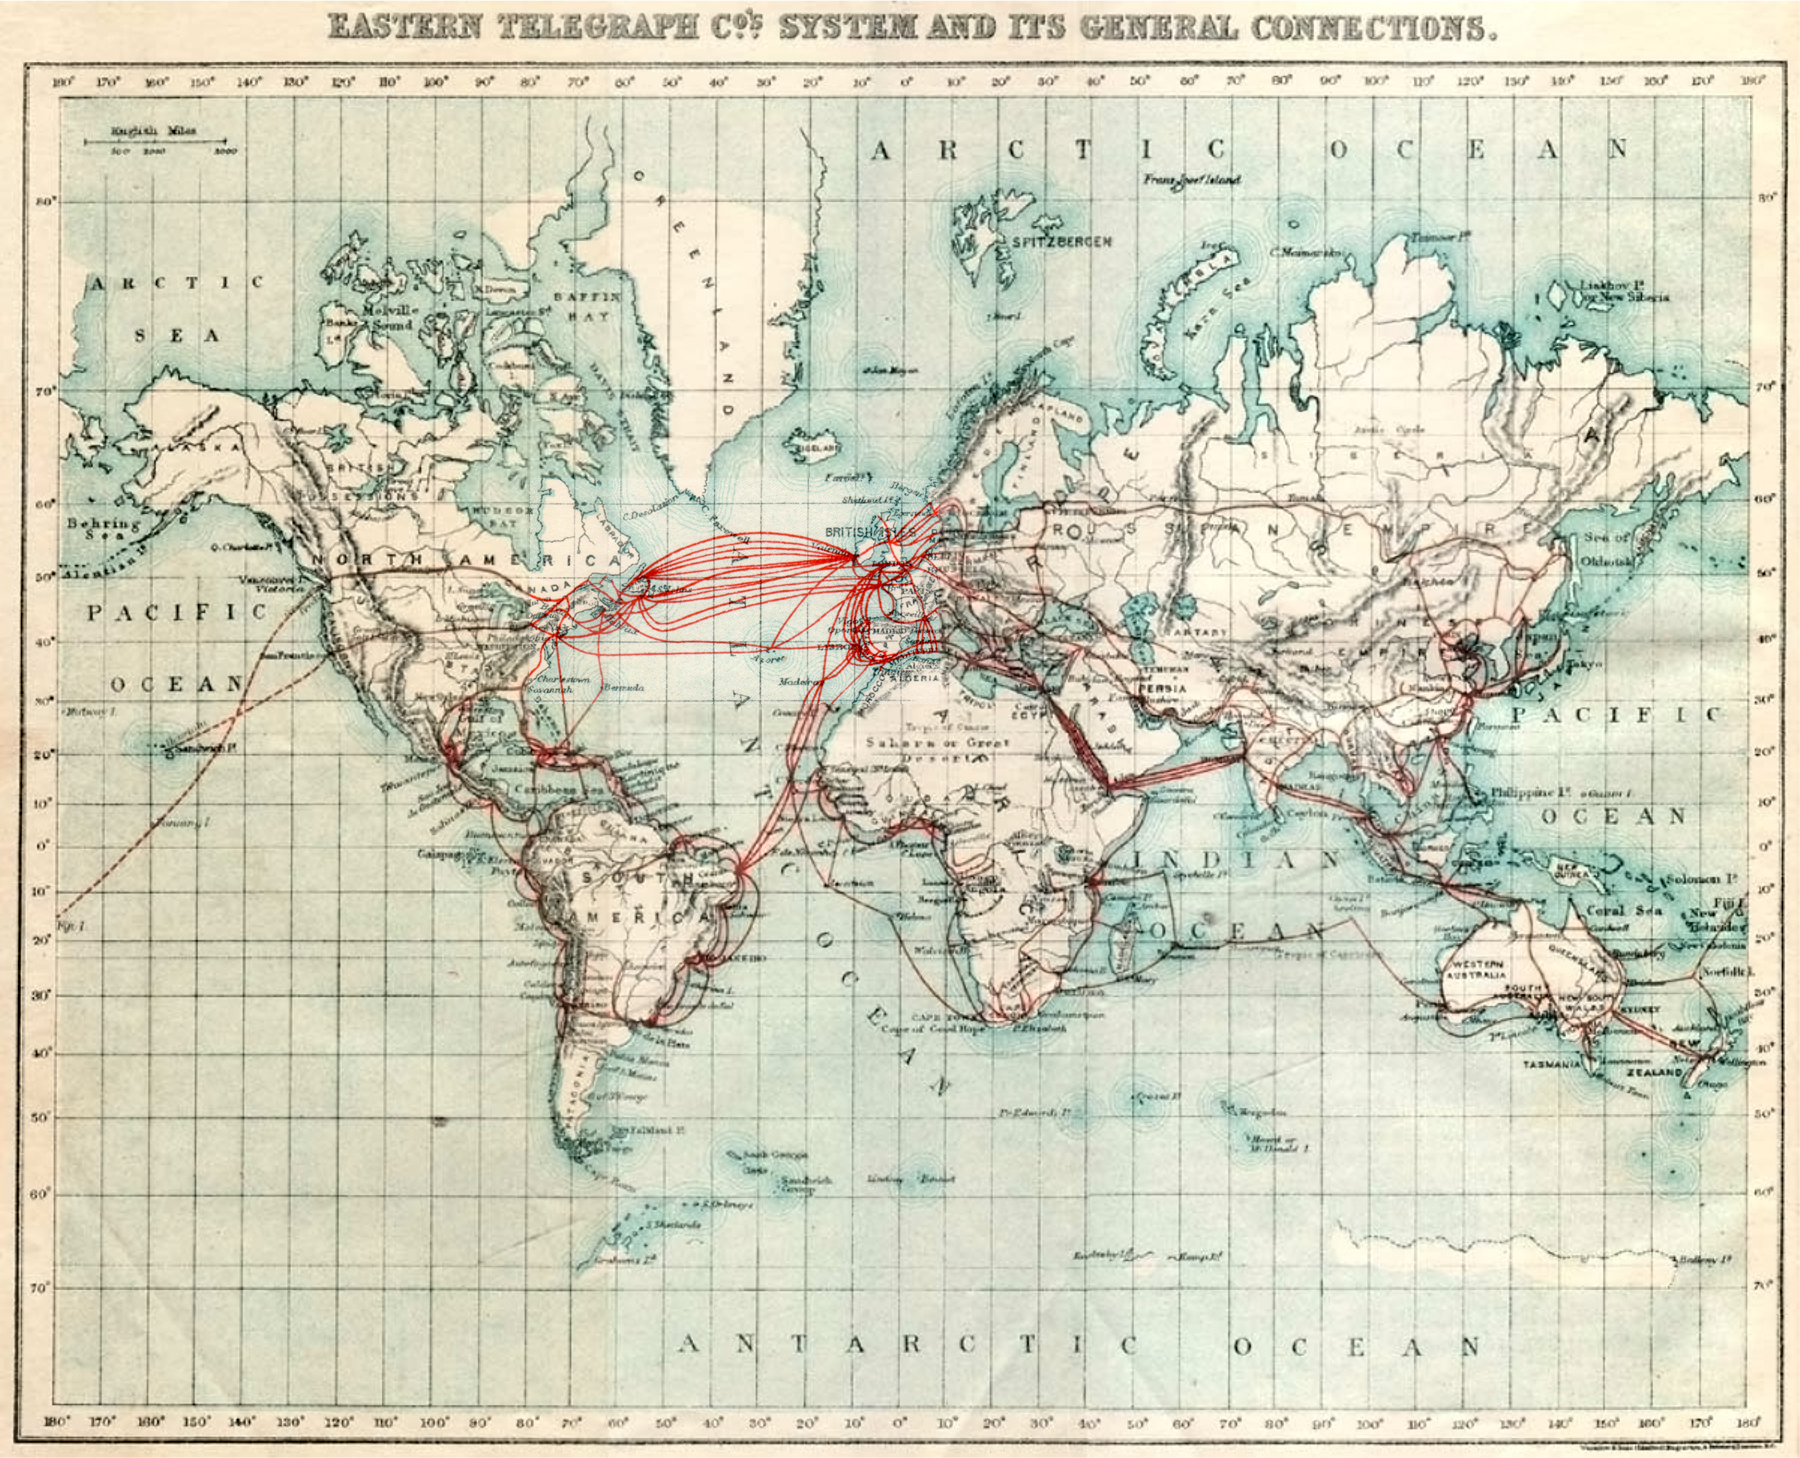 The Eastern Telegraph Co. System and its general connections. Chart of submarine telegraph cable routes, showing the global reach of telecommunications at the beginning of the 20th century